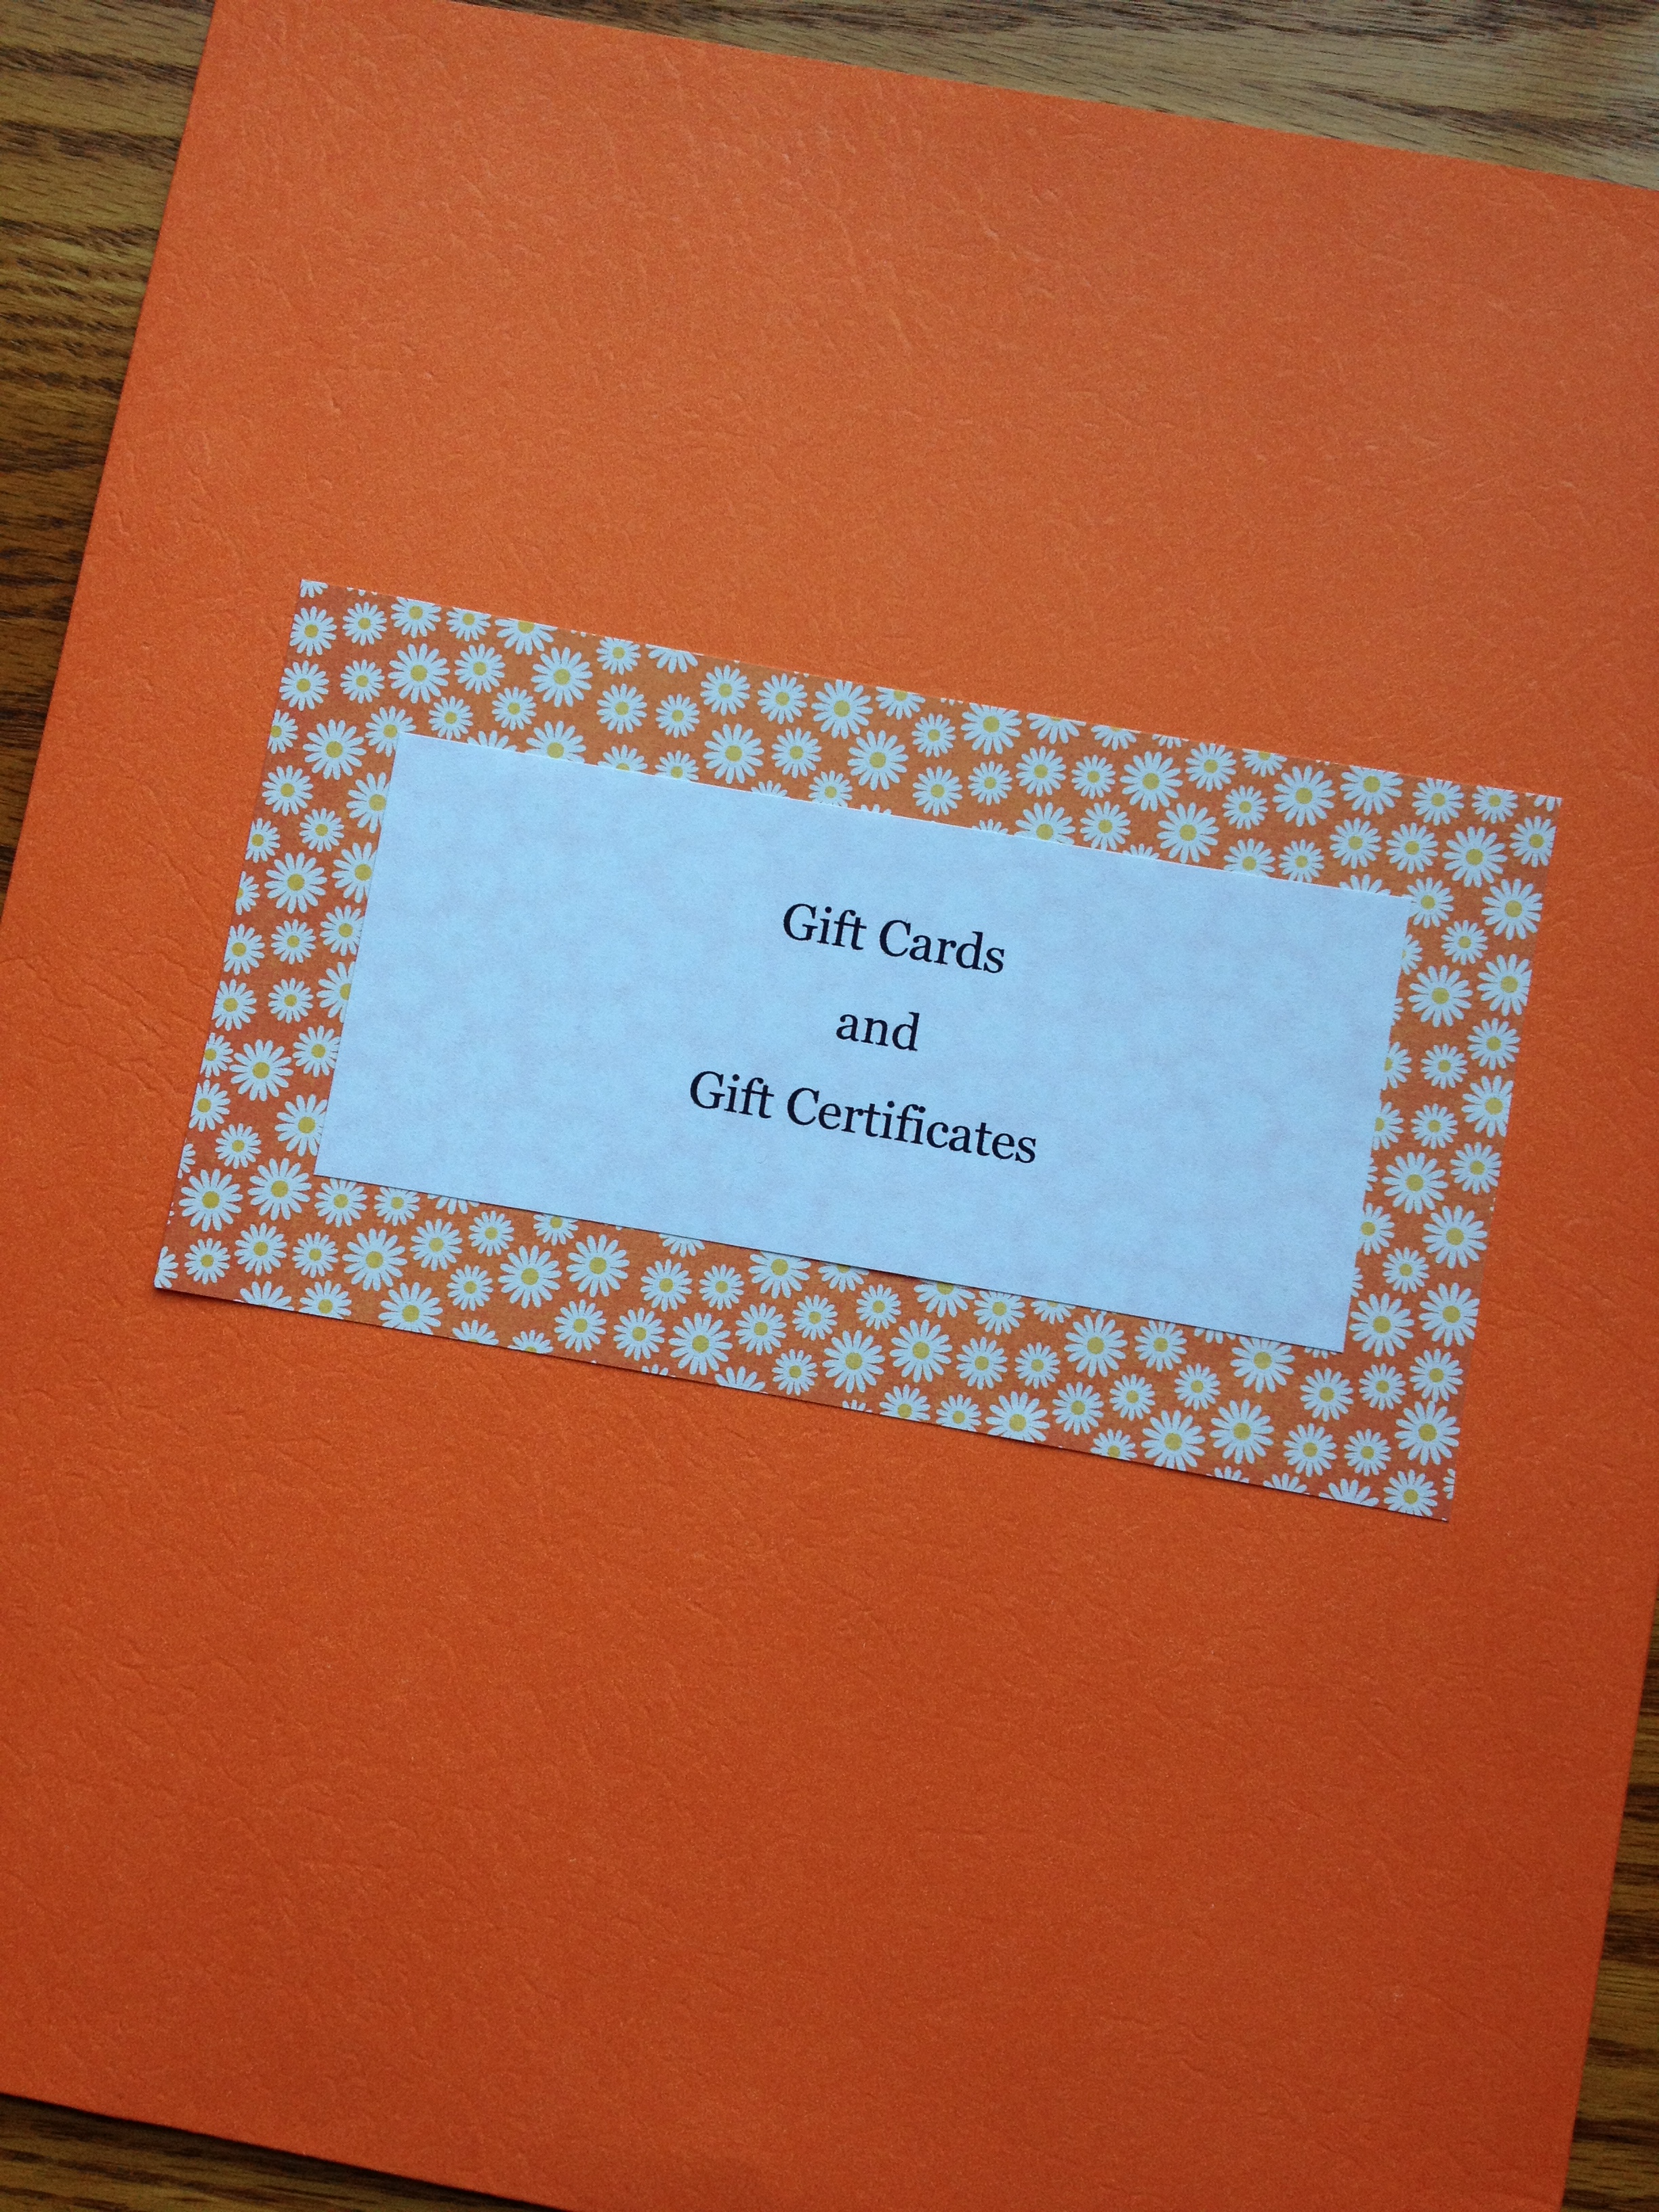 Organize Your Gift Cards - Running A Household